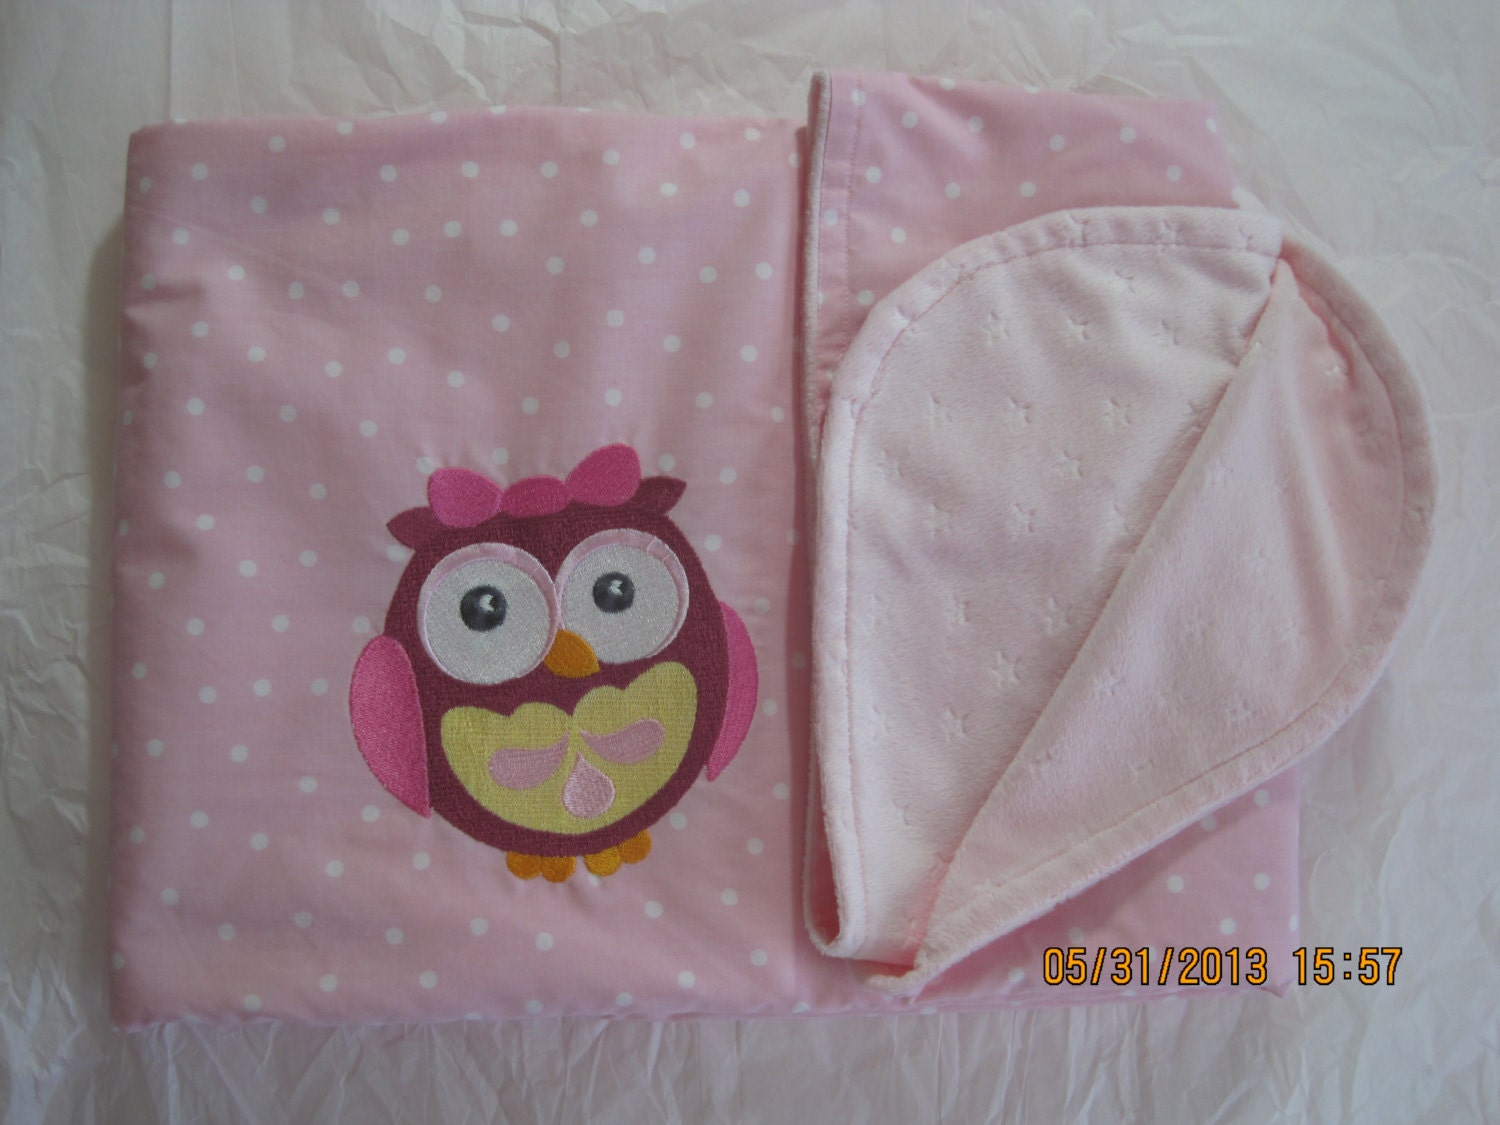 Embroidered owl blanket with star minky backing